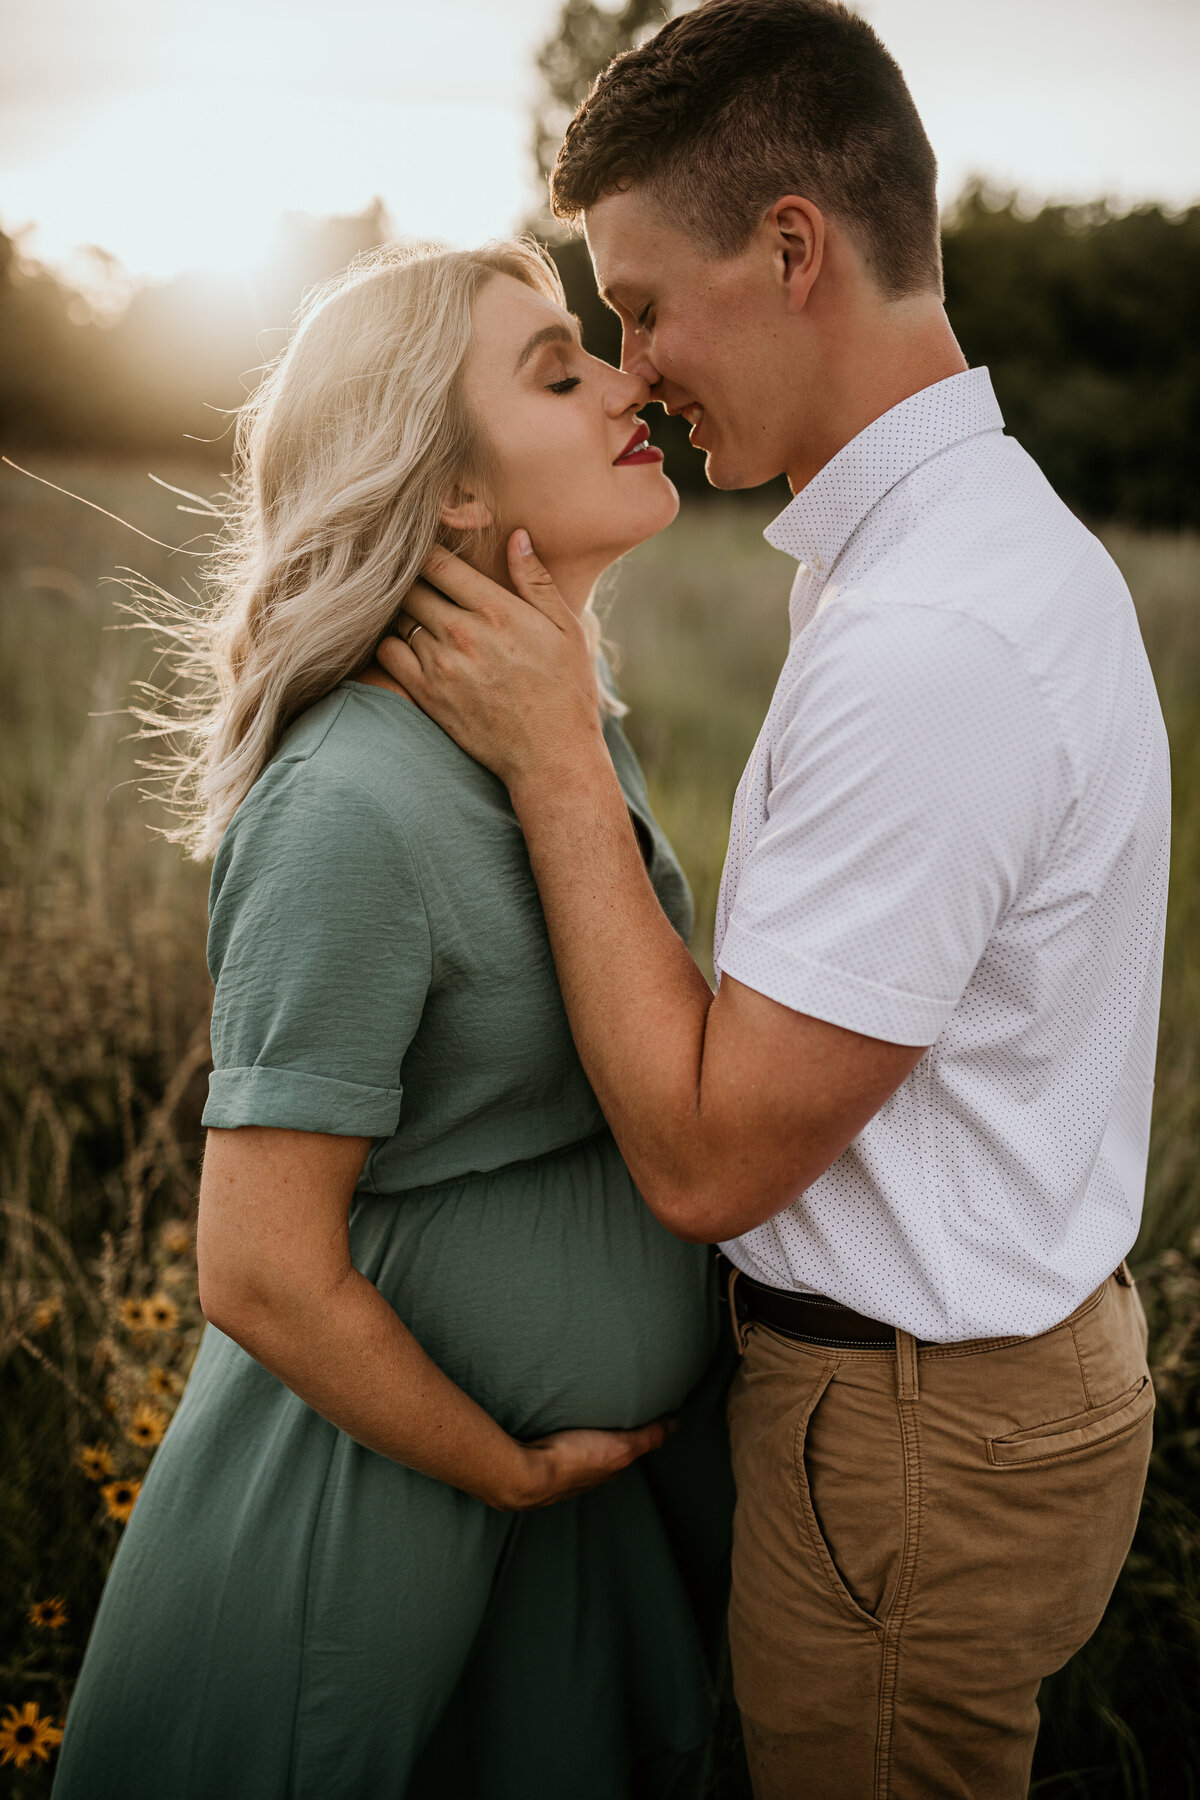 Maternity session in Sioux Falls, South Dakota.